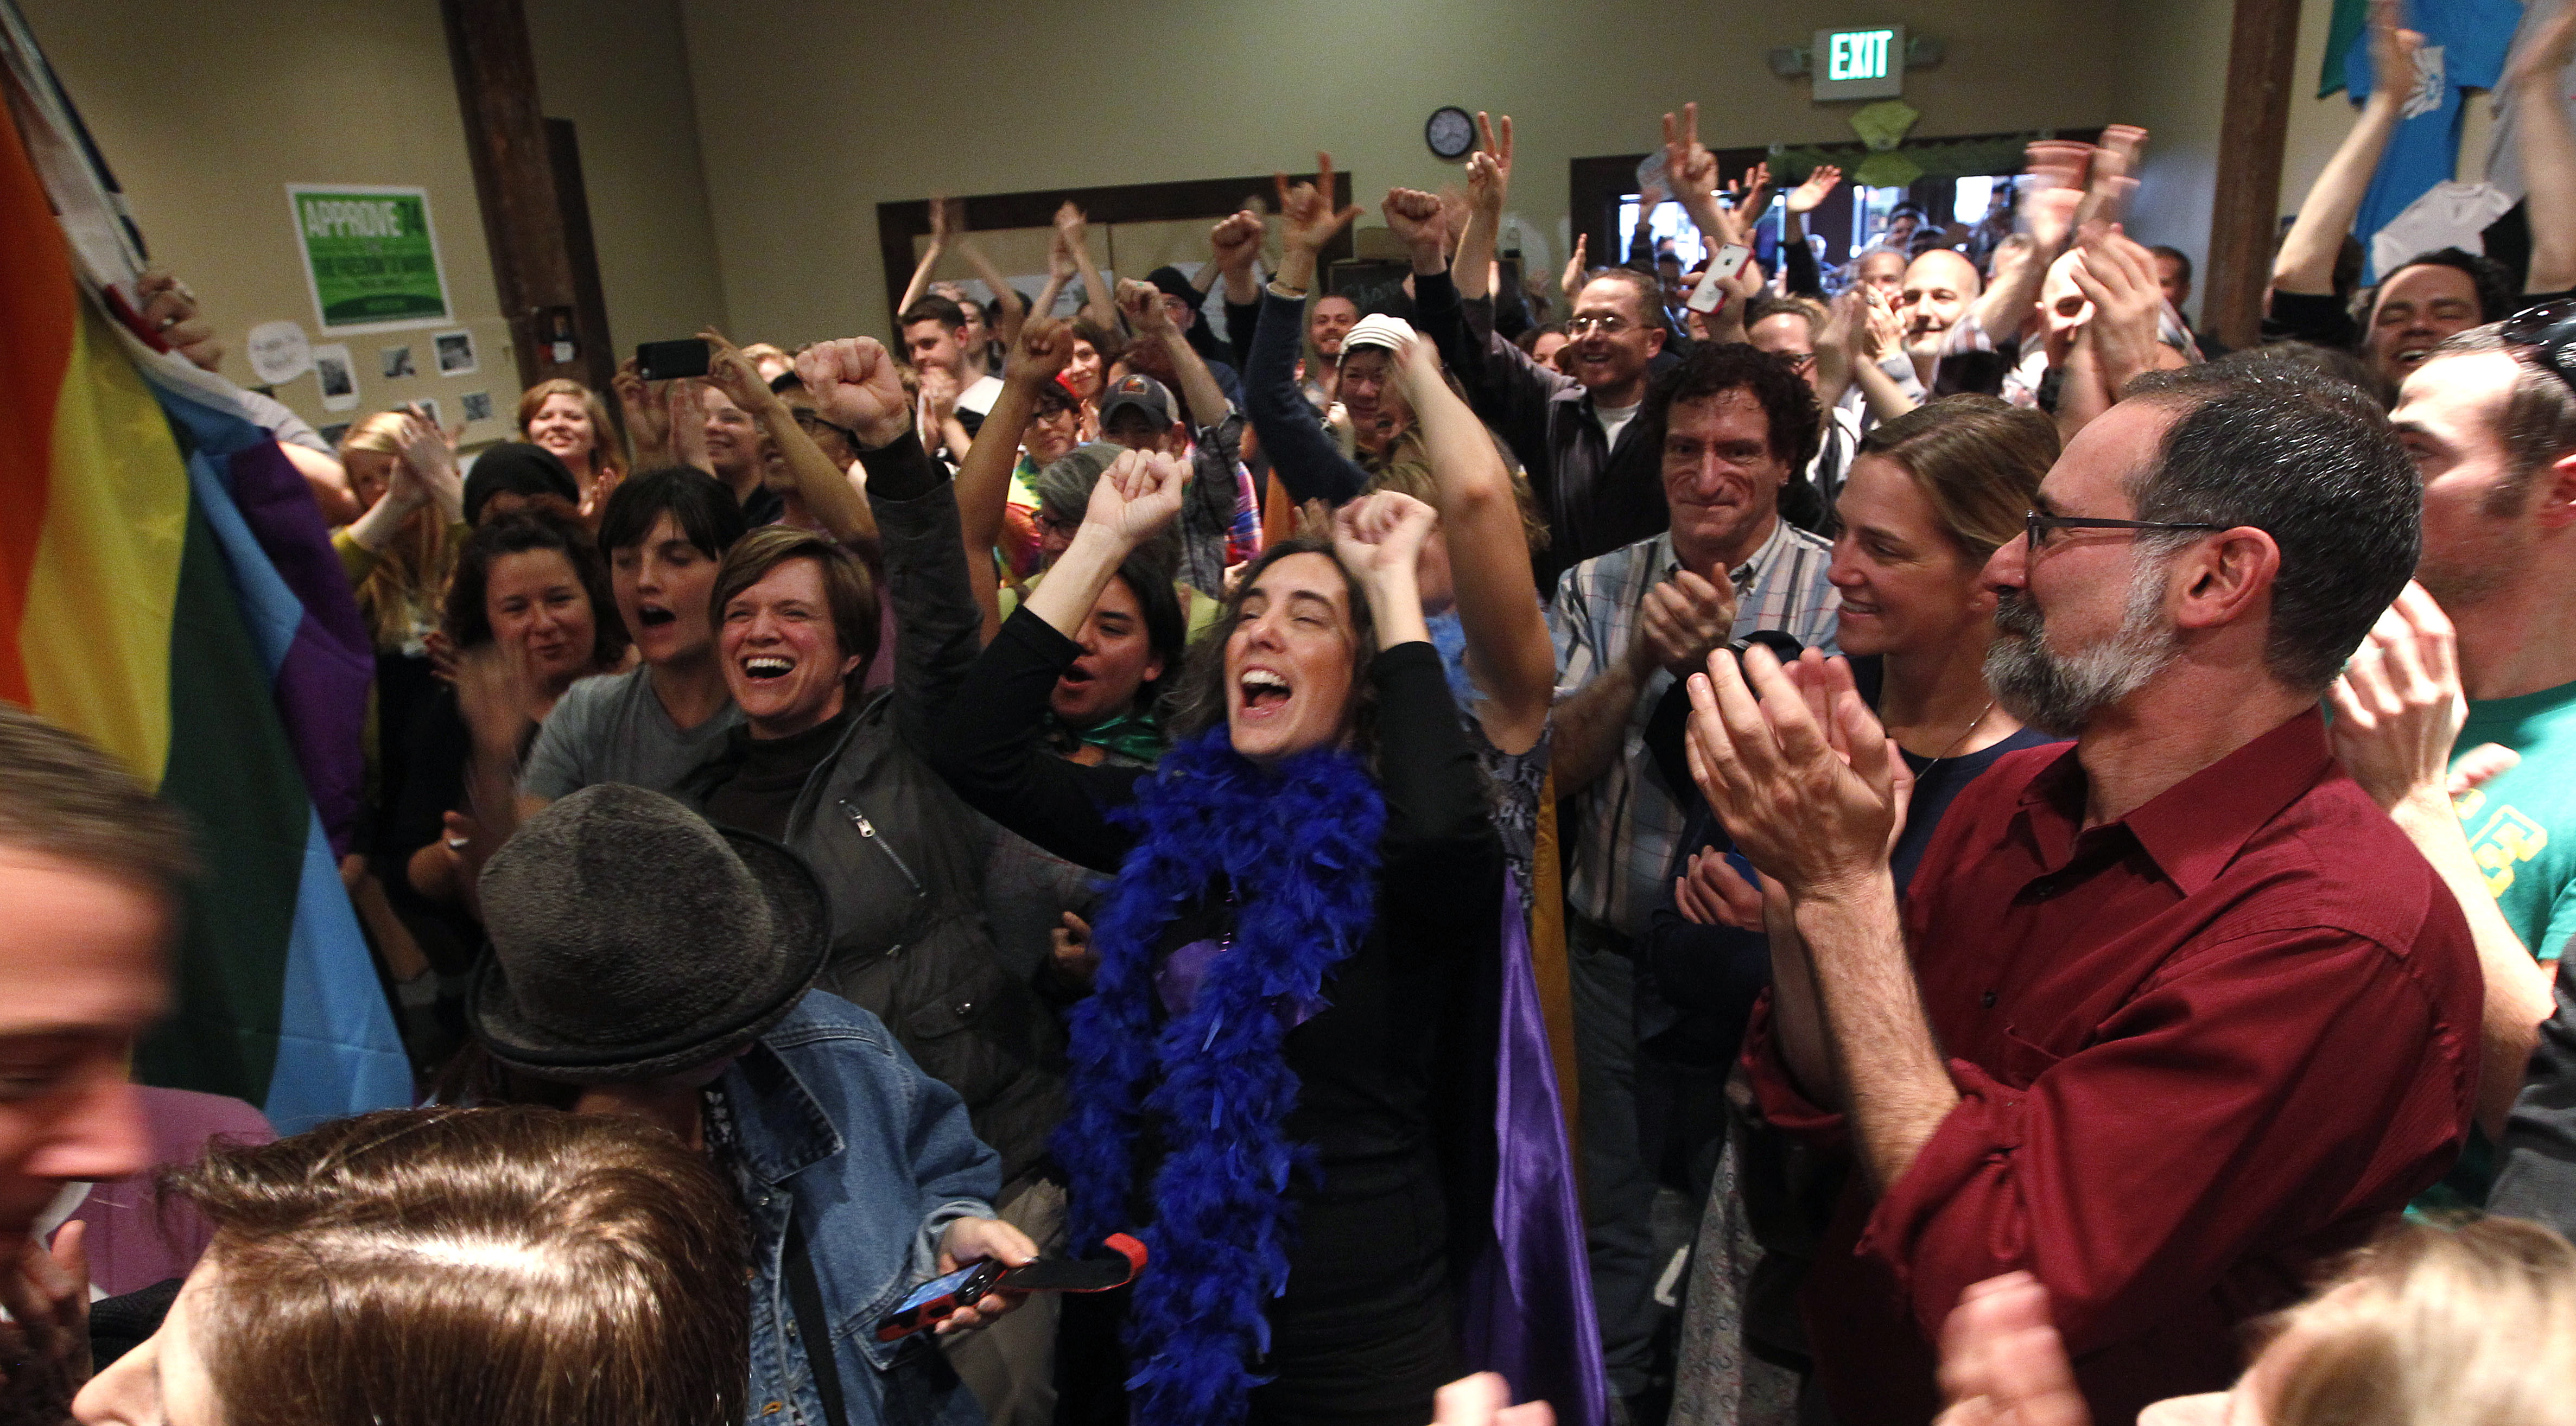 Supporters of Referendum 74, which would uphold the state's new same-sex marriage law, cheer at a news conference Wednesday in Seattle.